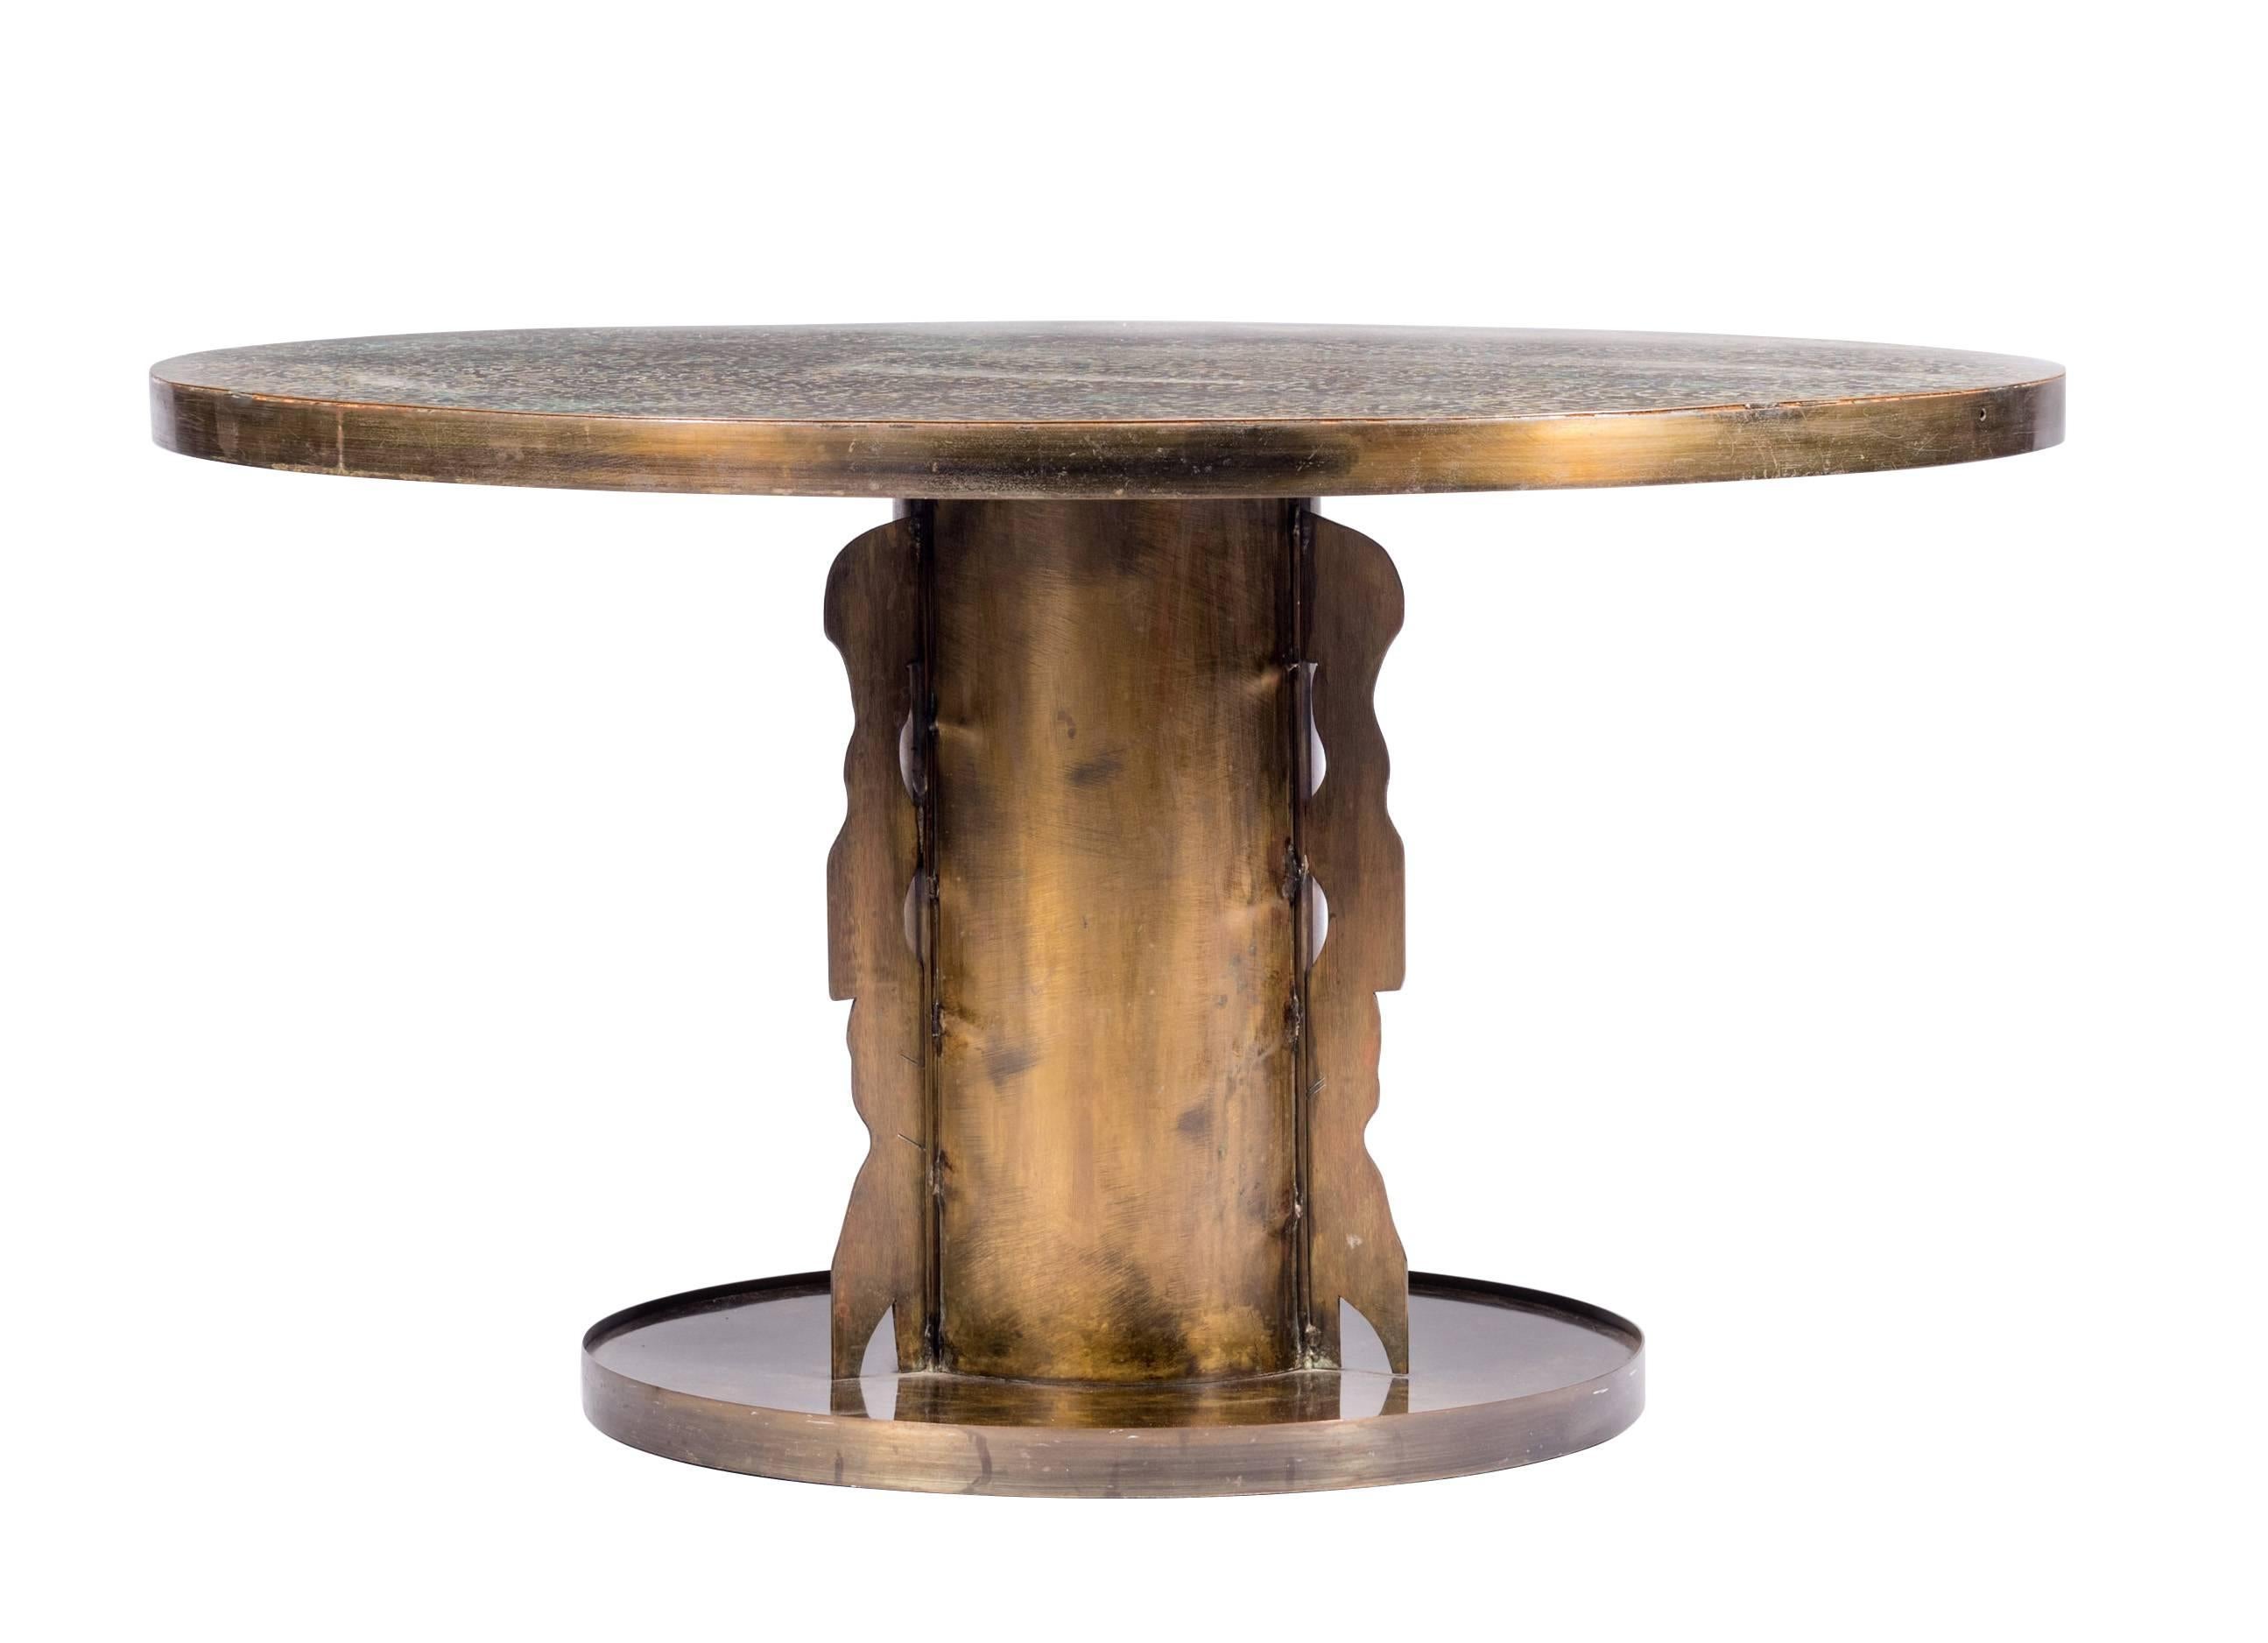 Desirable Estruscan patterned coffee table by Philip and Kelvin LaVerne. The Etruscan pattern is derived from ancient Italian art and specifically what is now Tuscany. The base with architectural elements and some natural patina to top.